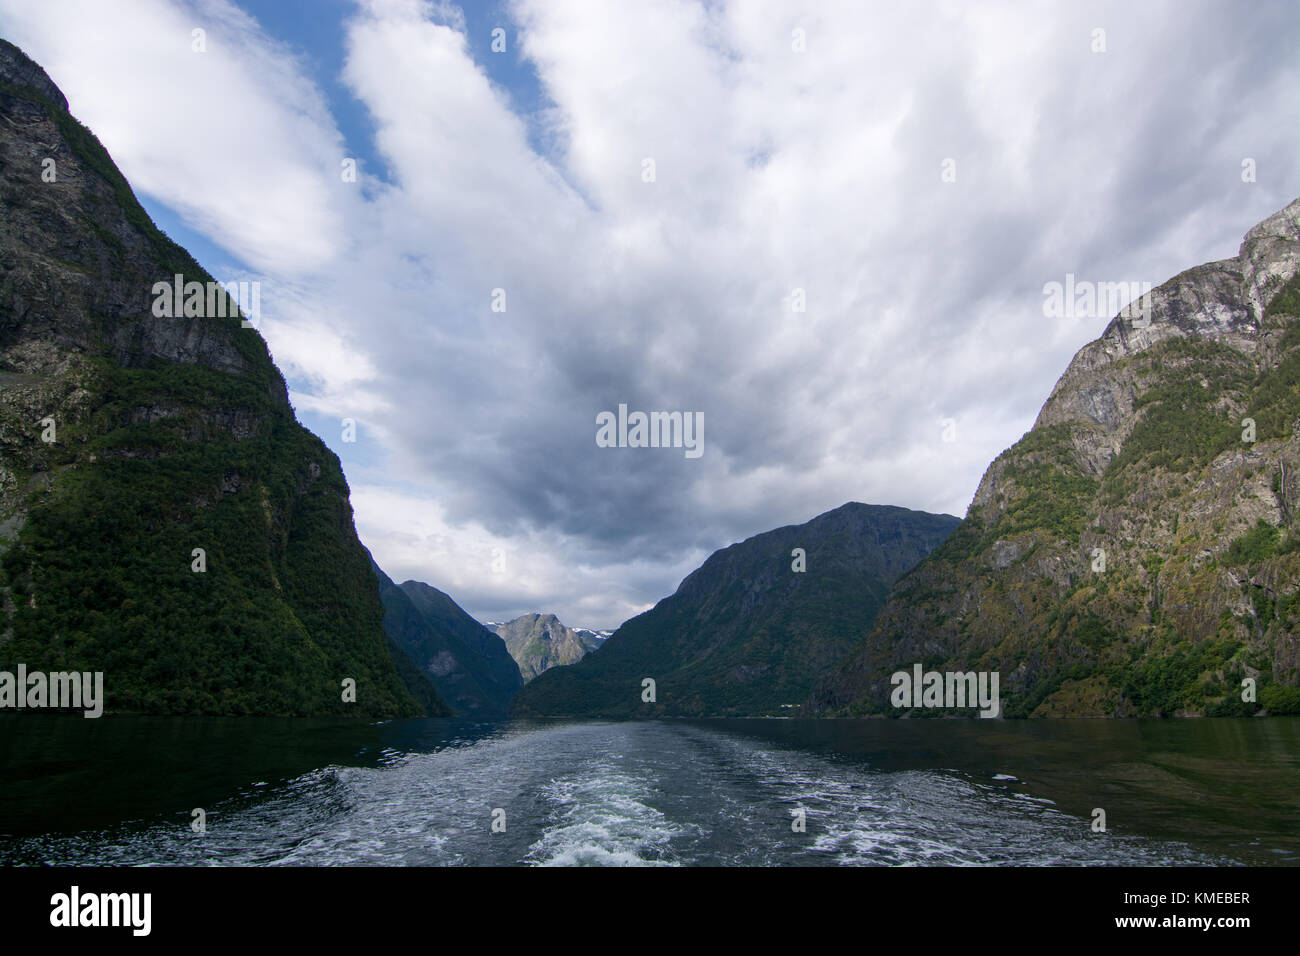 The Naeroyfjord is a fjord in the municipality of Aurland in Sogn og Fjordane, Norway. Stock Photo